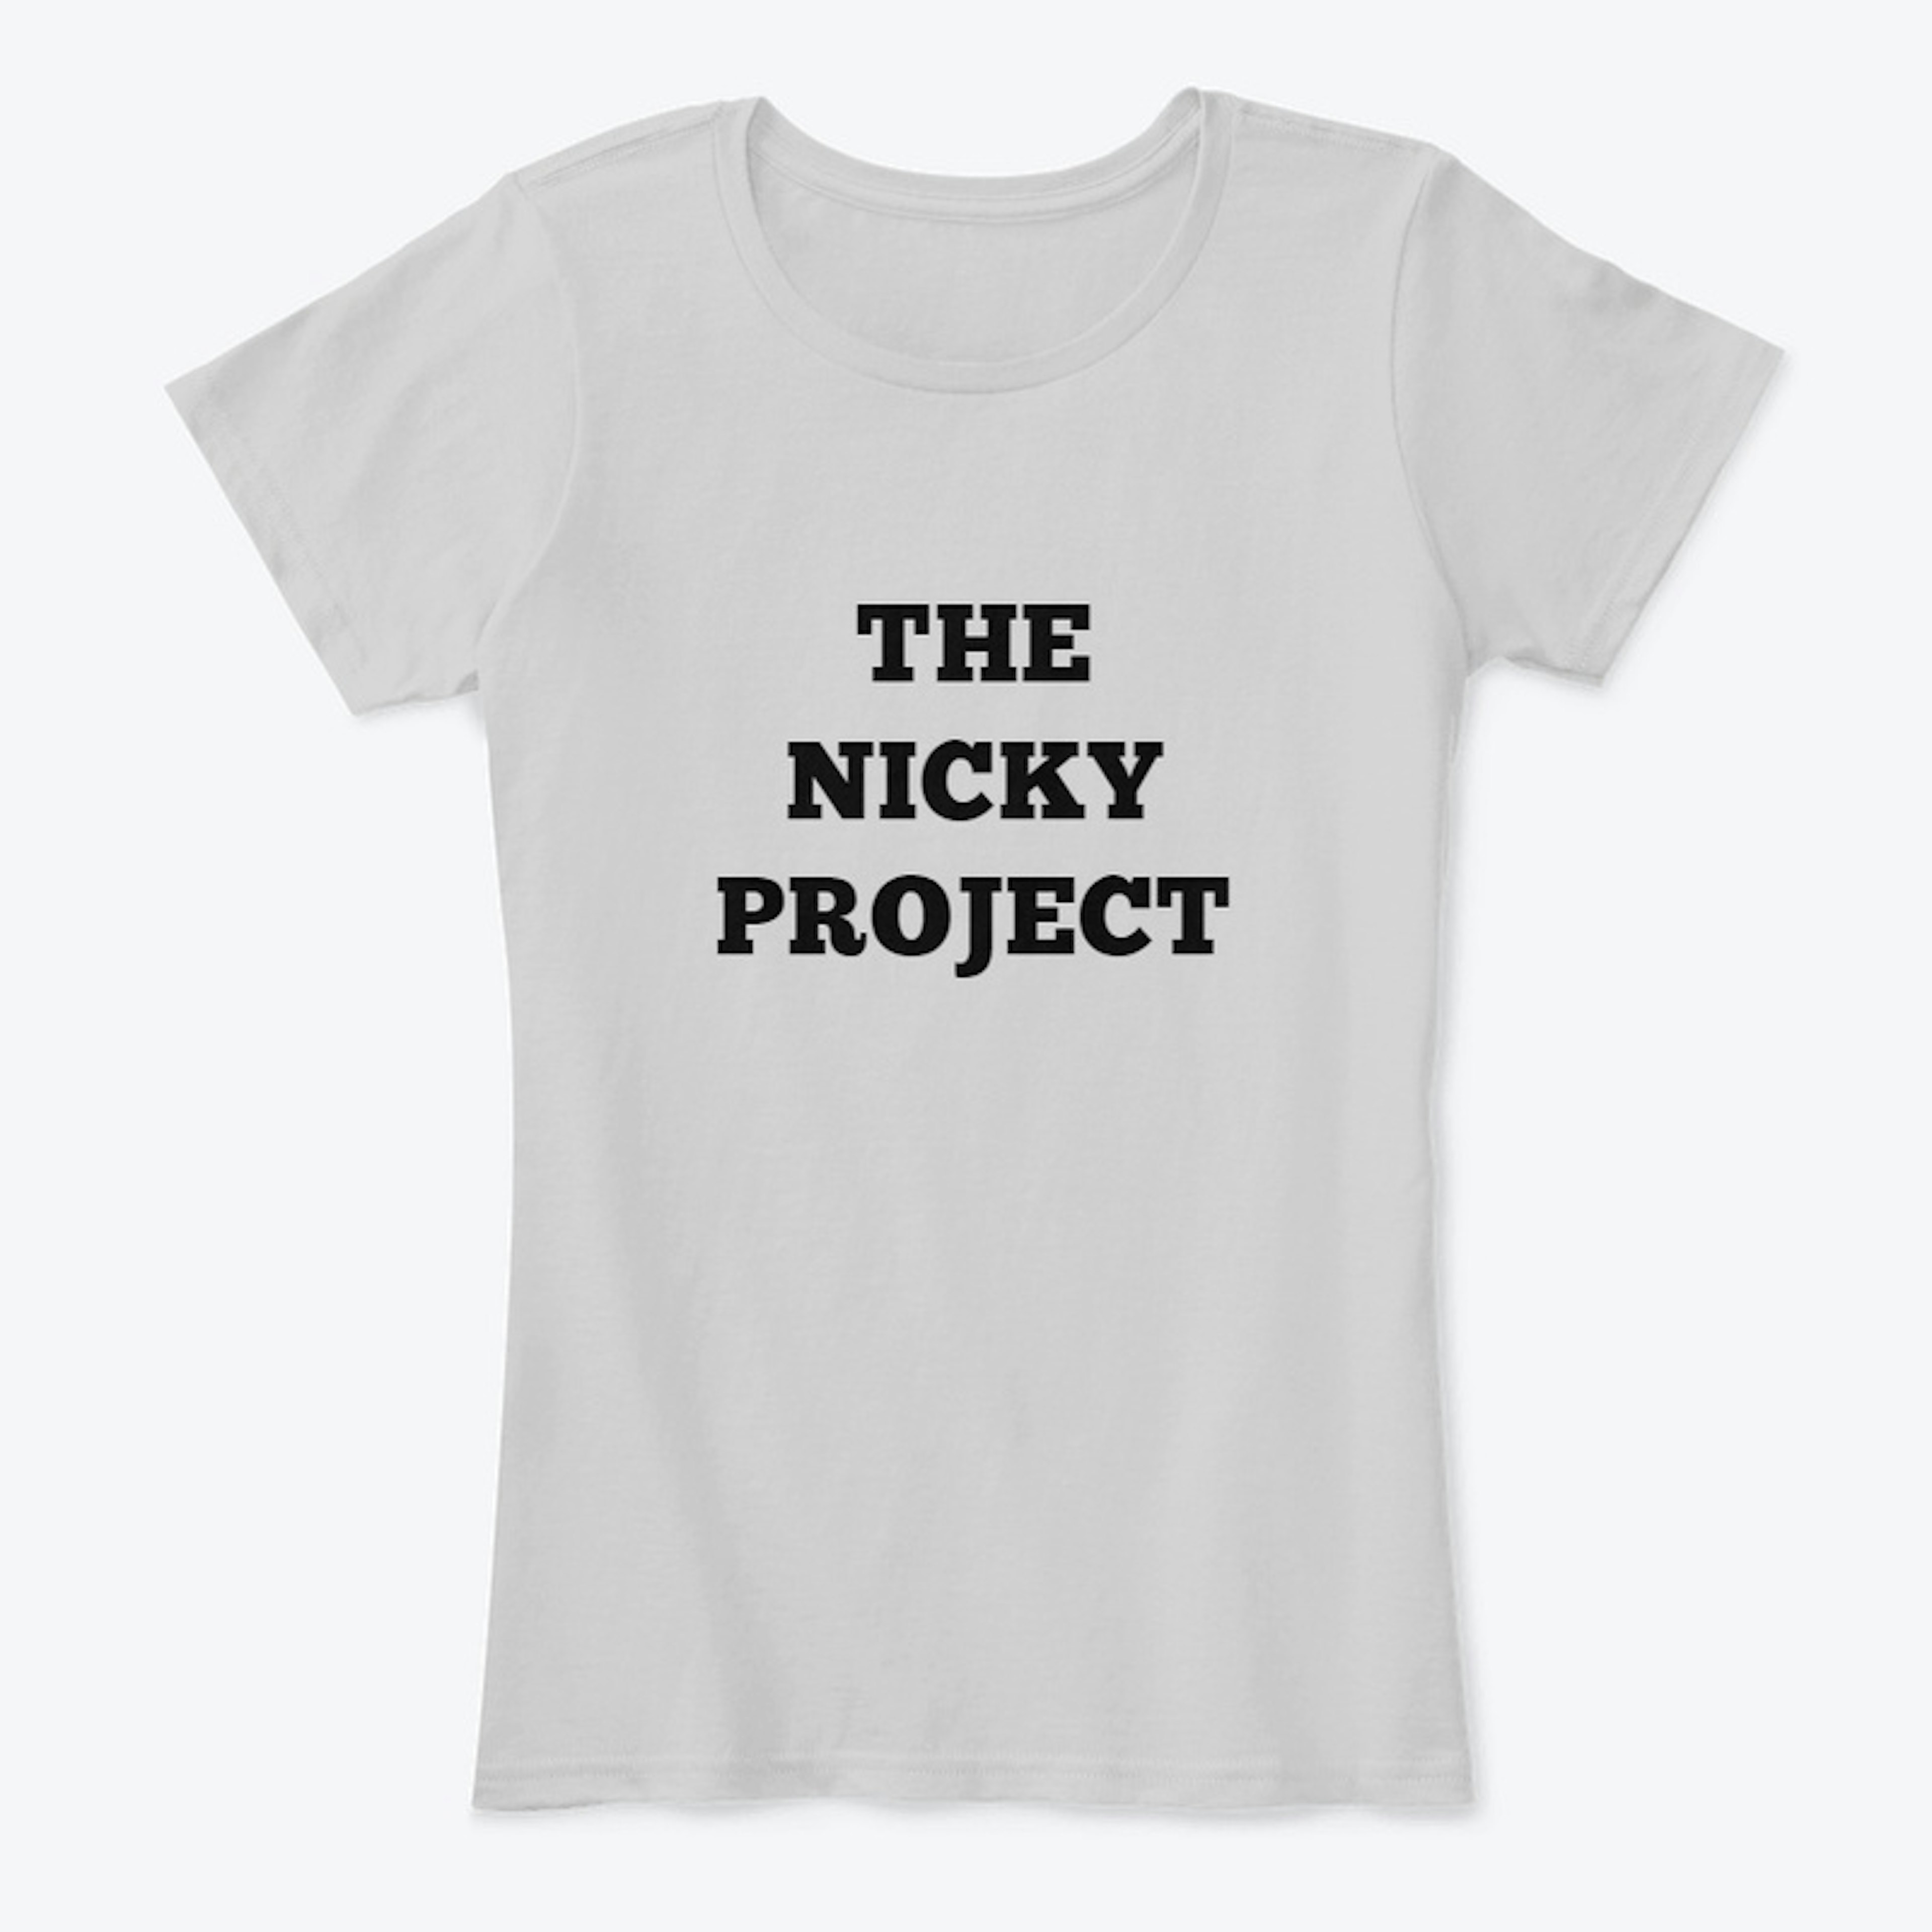 The Nicky Project